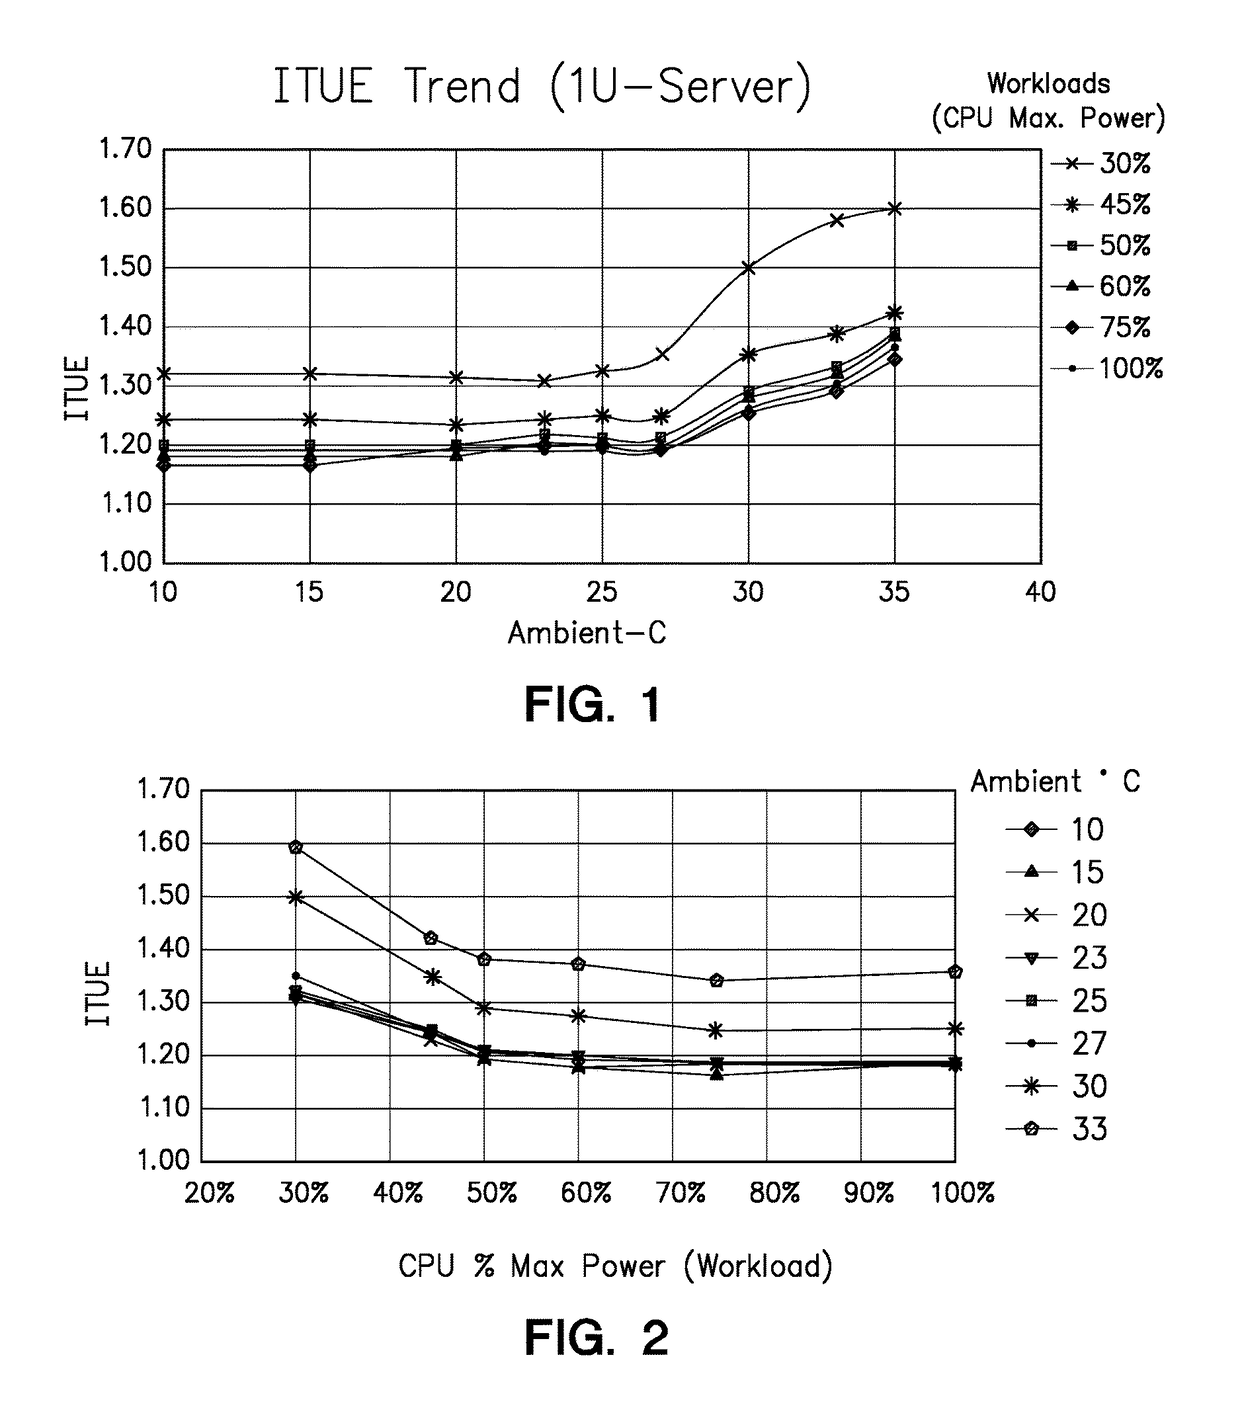 Energy efficient workload placement management using predetermined server efficiency data